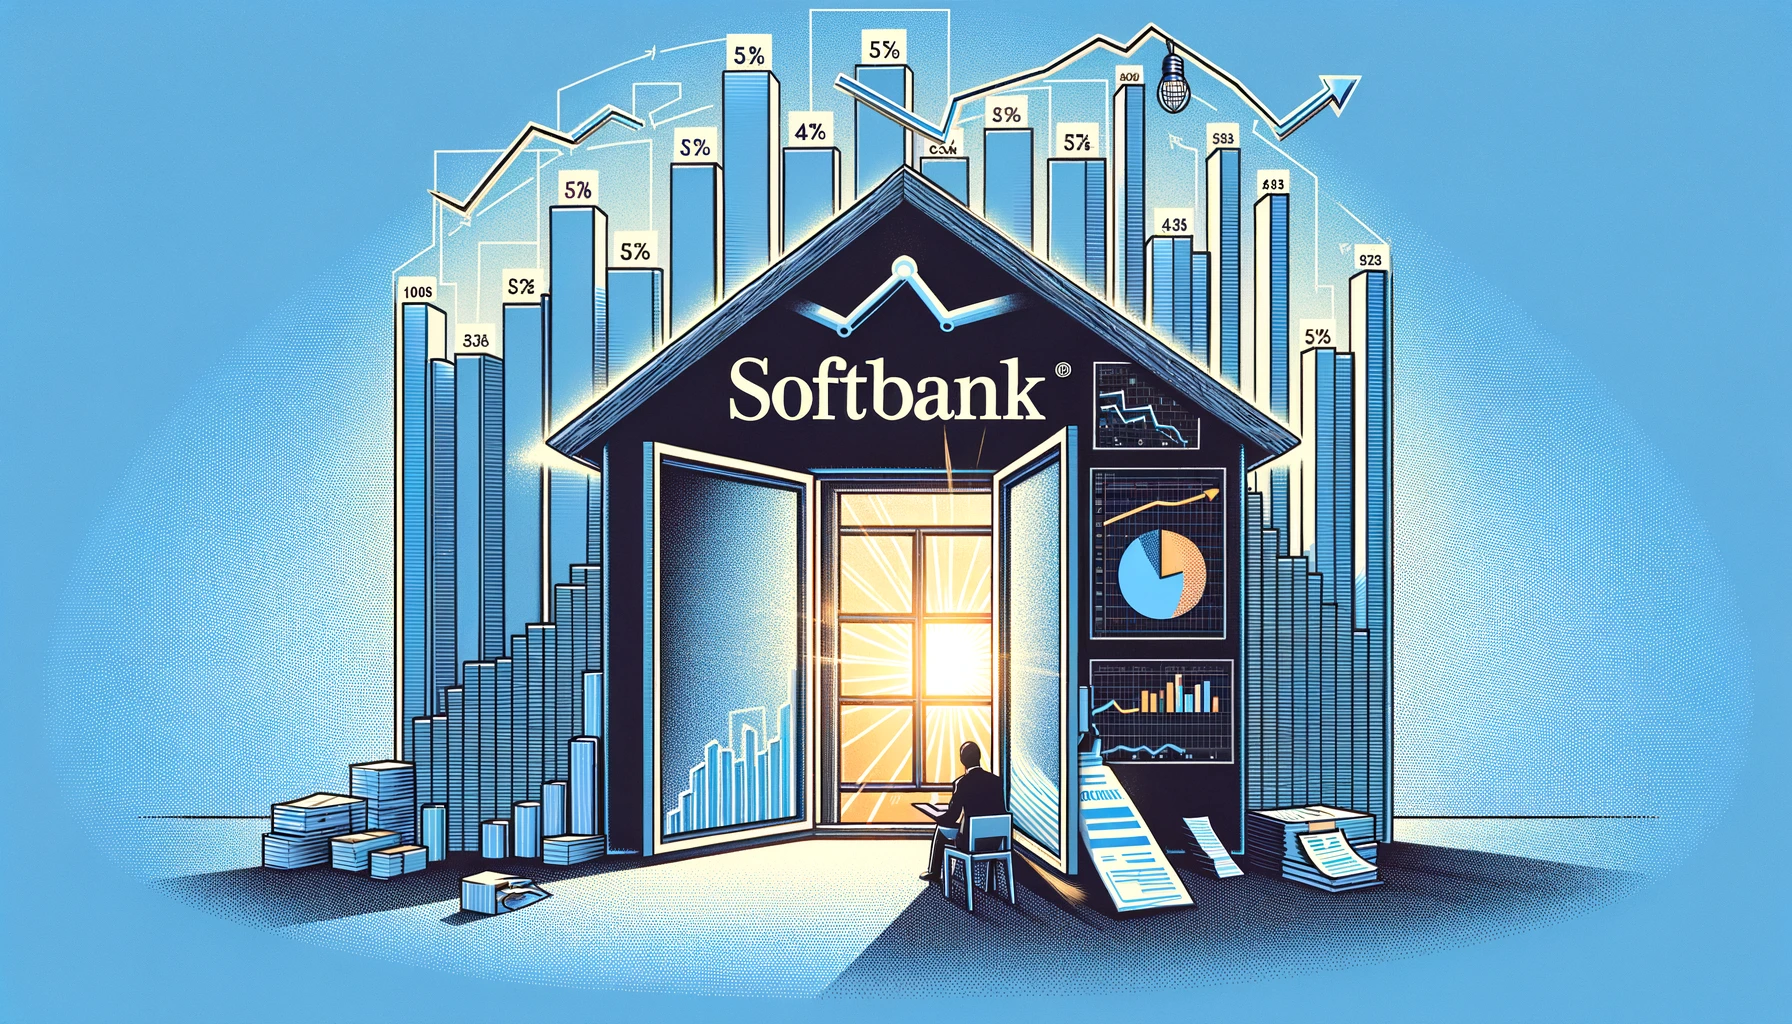 simple vector-style image representing the news article about the window manufacturer supported by SoftBank declaring bankruptcy to reduce their debt burden. This conceptual artwork aims to balance the themes of financial challenges and hope for recovery.